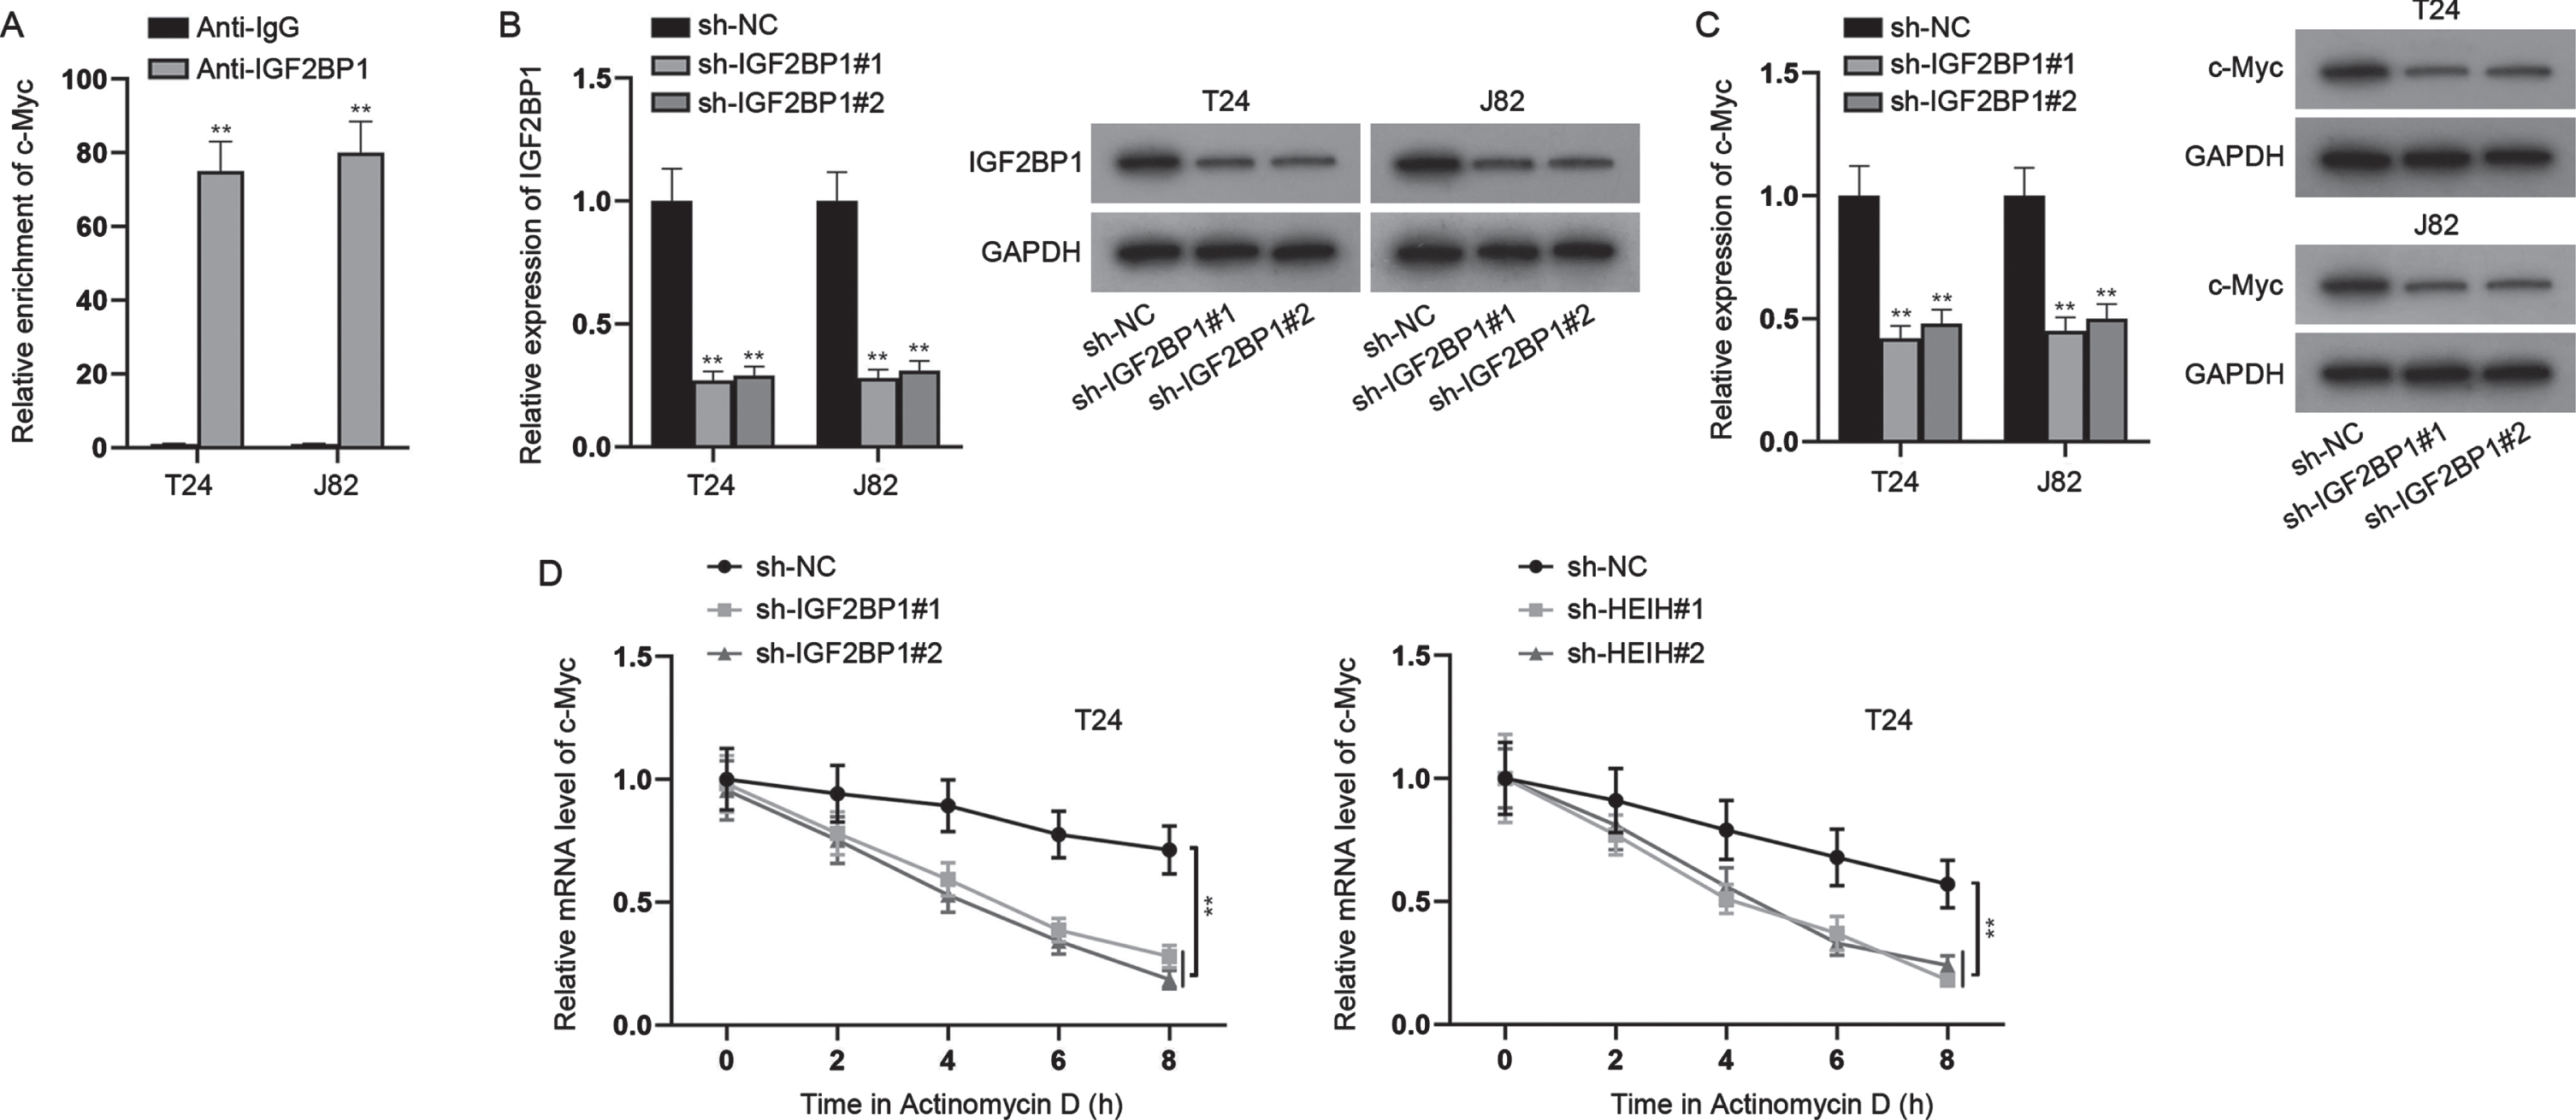 HEIH regulates c-Myc expression via targeting the miR-4500/IGF2BP1 axis. (A) ChIP assays were performed to detect the combination between c-Myc and IGF2BP1 in BCa cells. (B) Silencing efficiency of IGF2BP1 in BCa cells was verified by RT-qPCR and western blot. (C) RT-qPCR and western blot were used to detect c-Myc mRNA and protein levels in IGF2BP1-silenced BCa cells. (D) Stability of c-Myc mRNA was detected in IGF2BP1-silenced or HEIH-depleted BCa cells after Actinomycin D treatment. **P < 0.01.